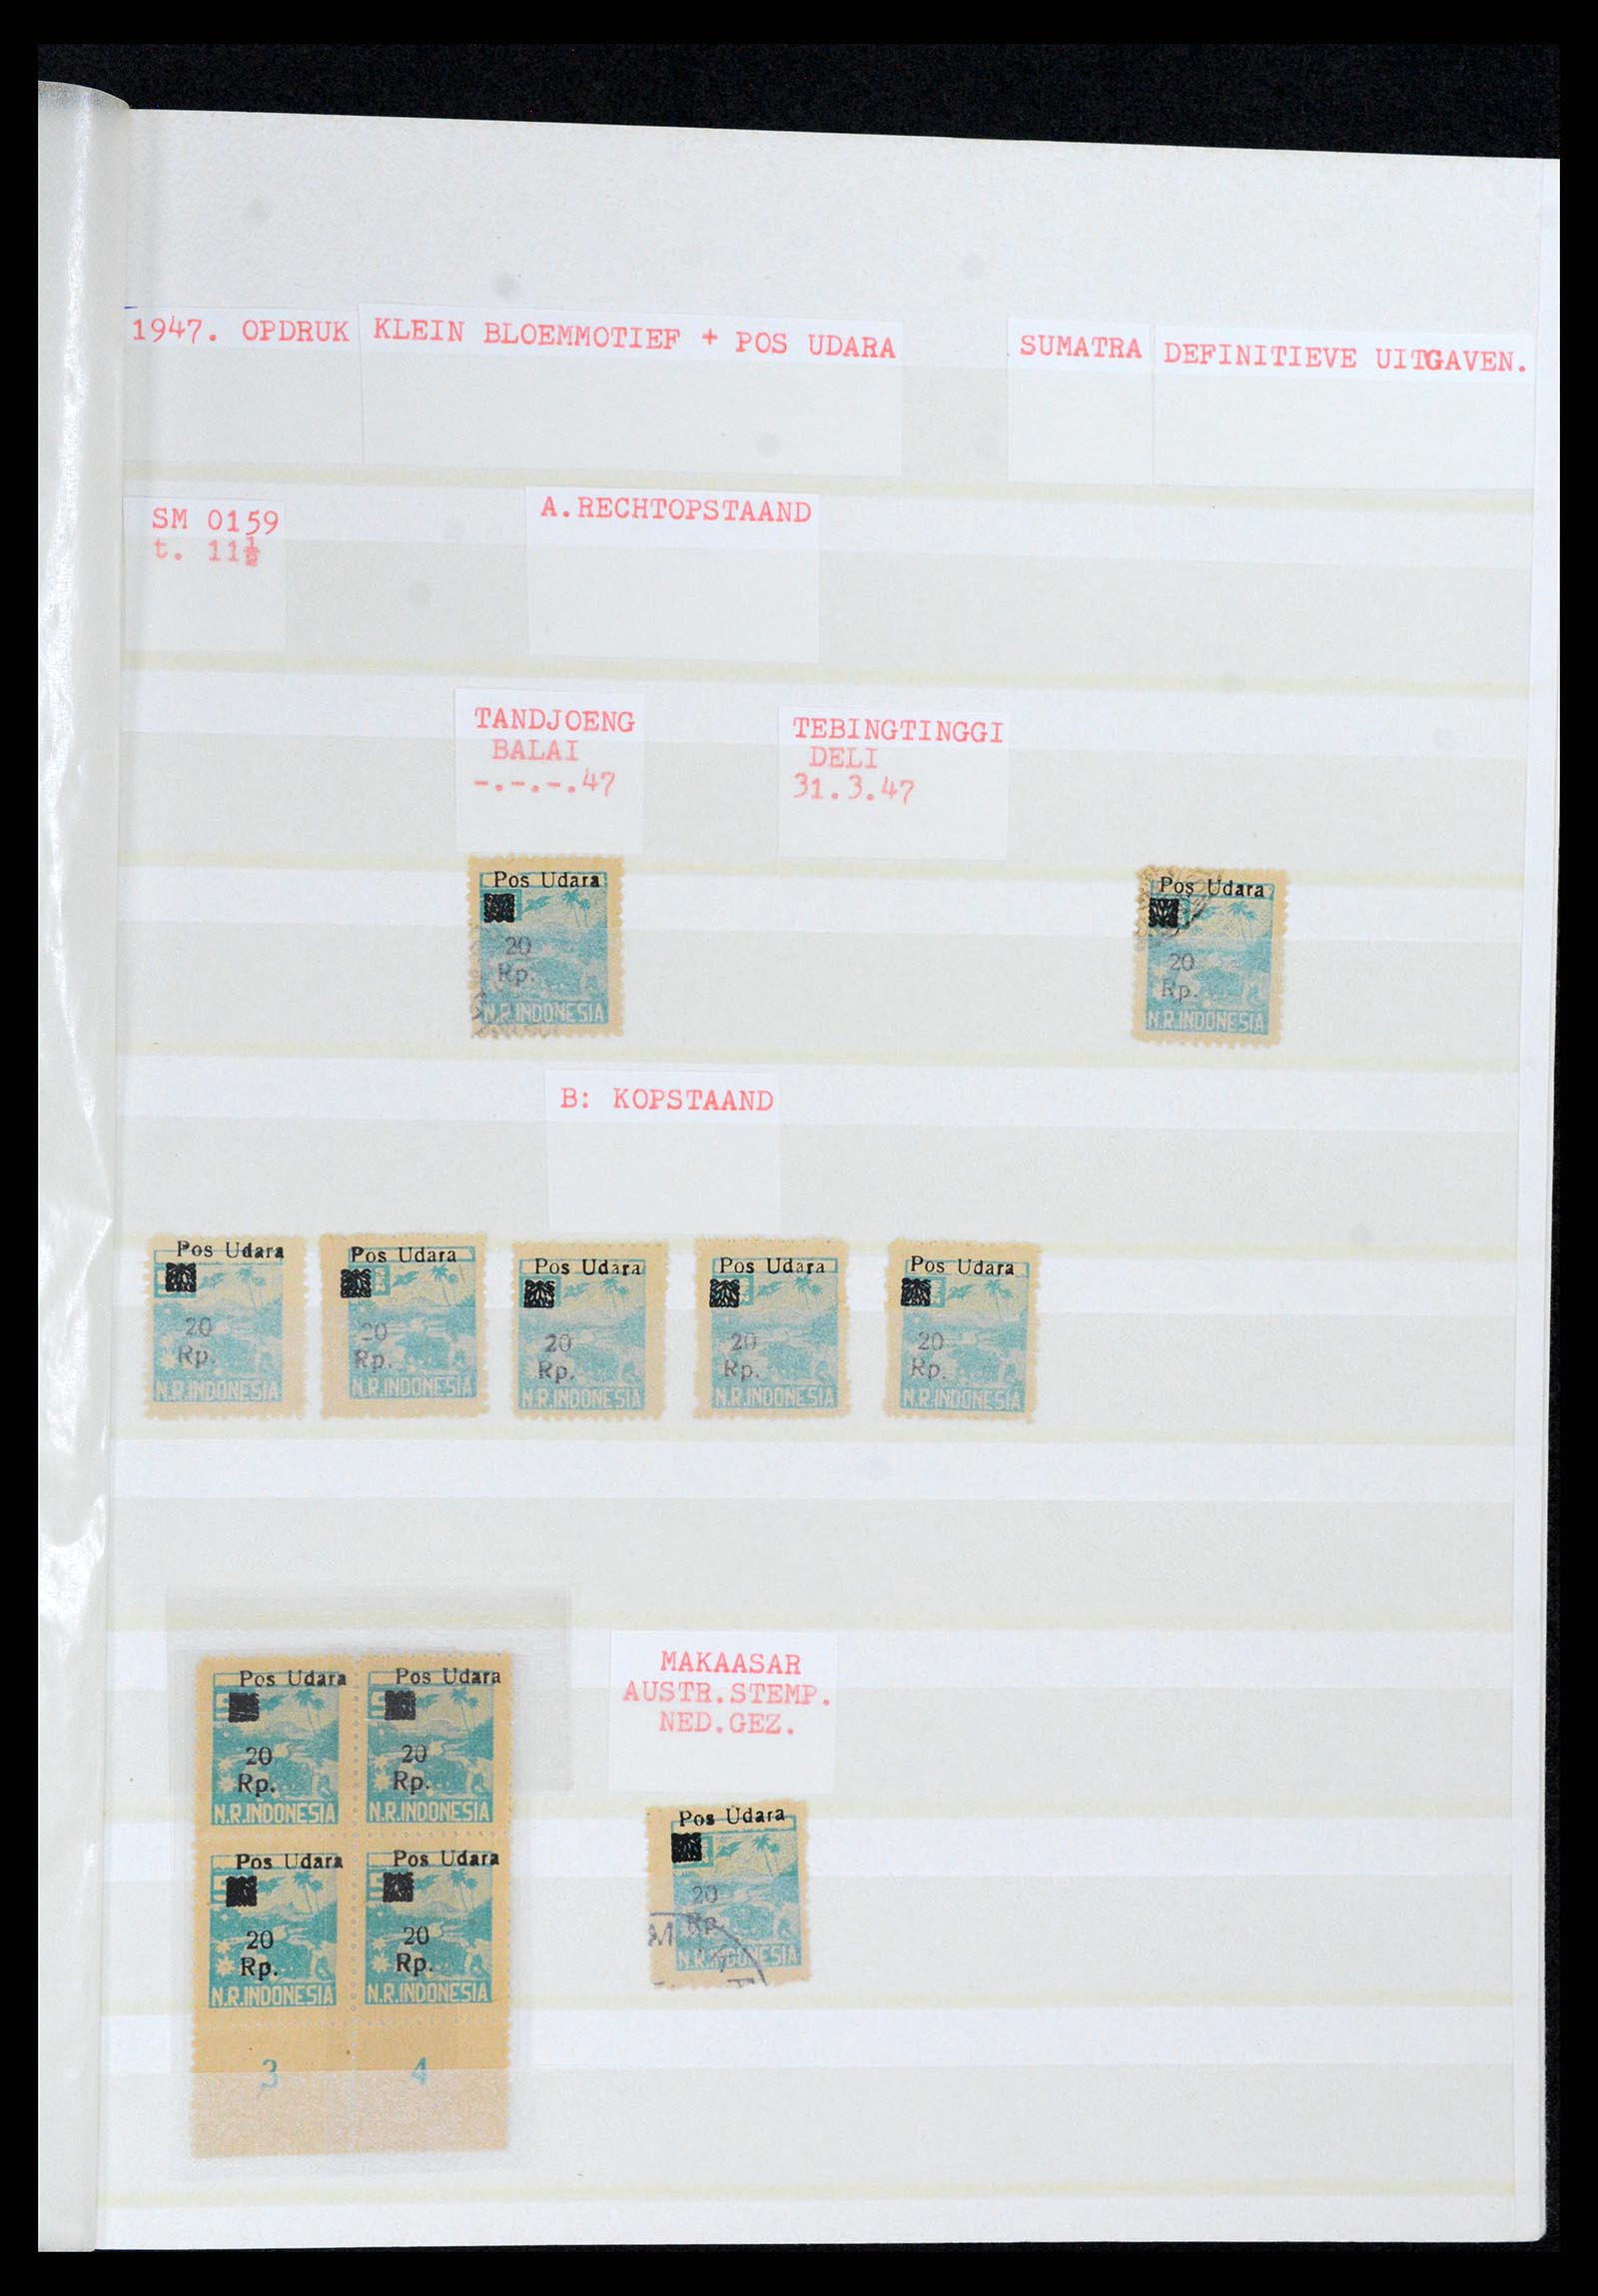 37692 153 - Stamp collection 37692 Indonesia interimperiod 1945-1499.